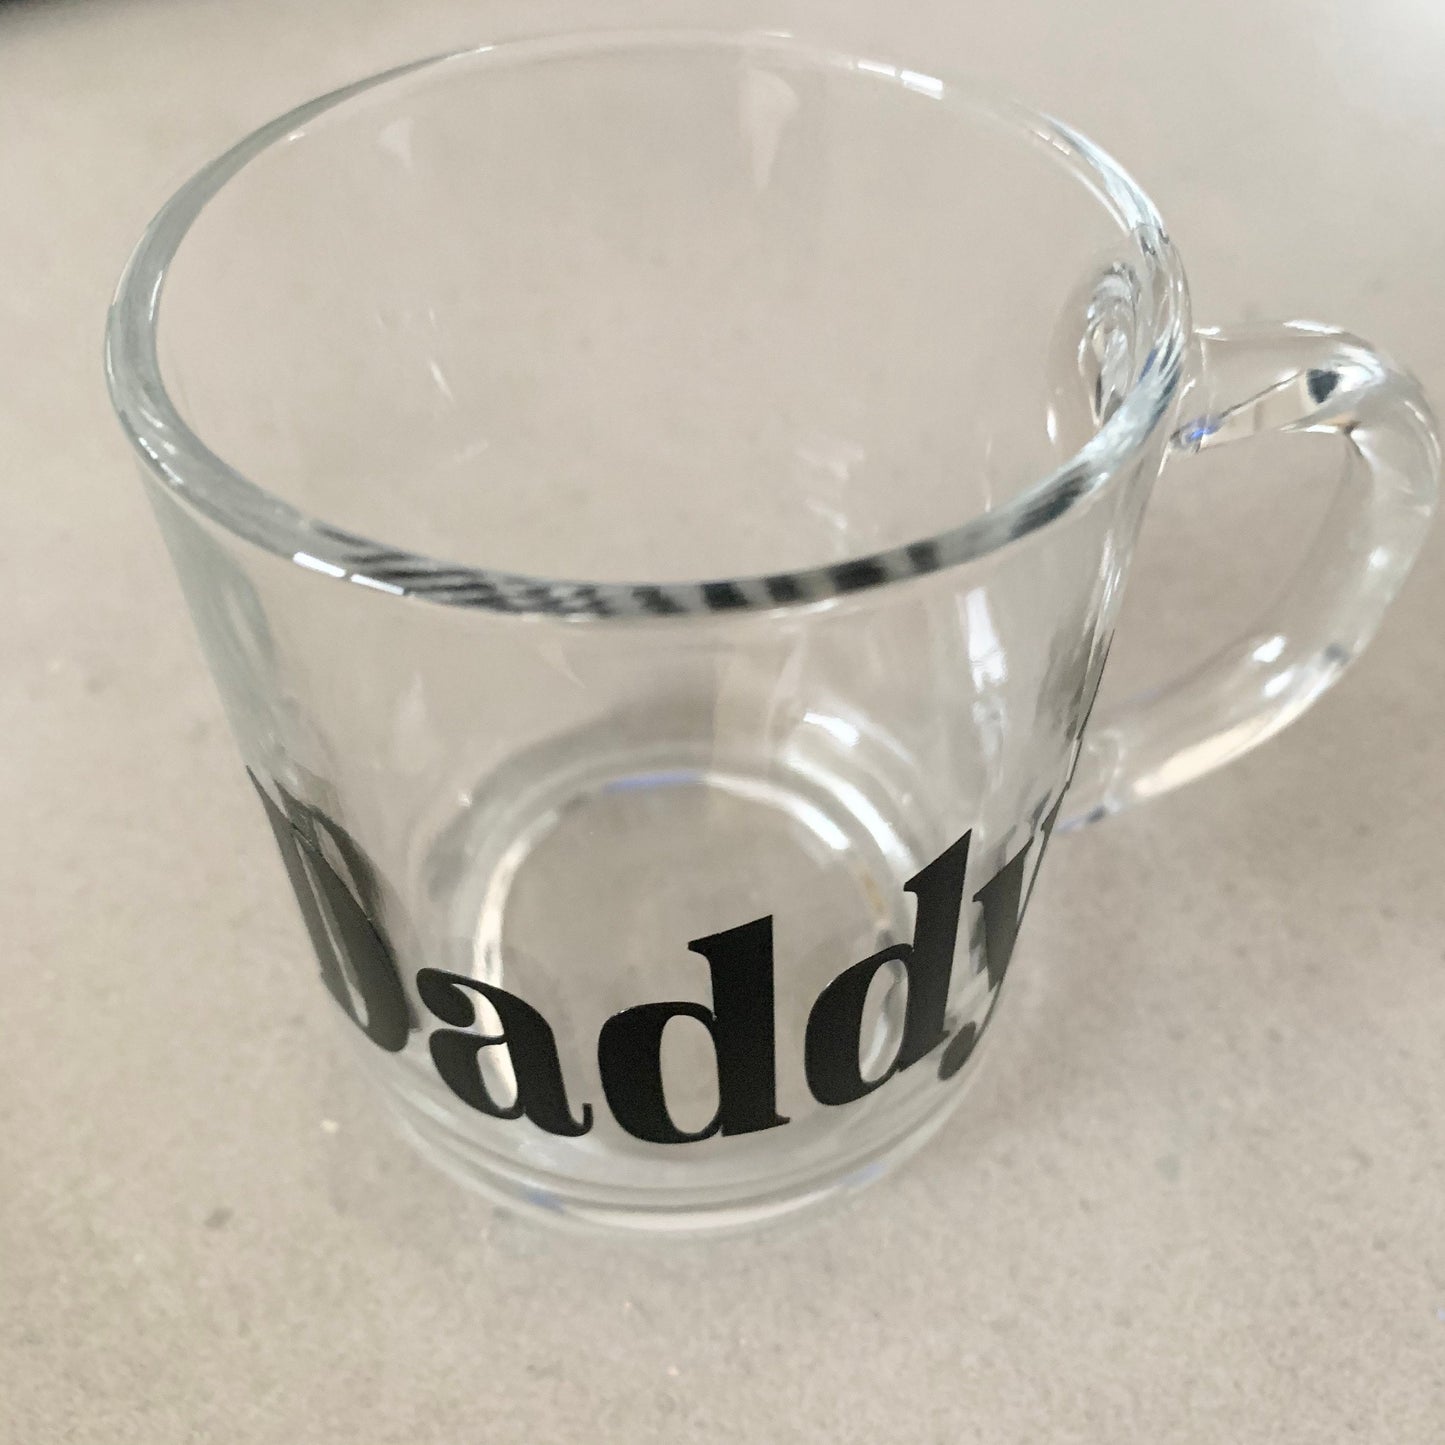 Personalised glass mug, daddy cup for Christmas gift, gift for him, personalised coffee mug, tea cup,male colleague gift, secret Santa gift